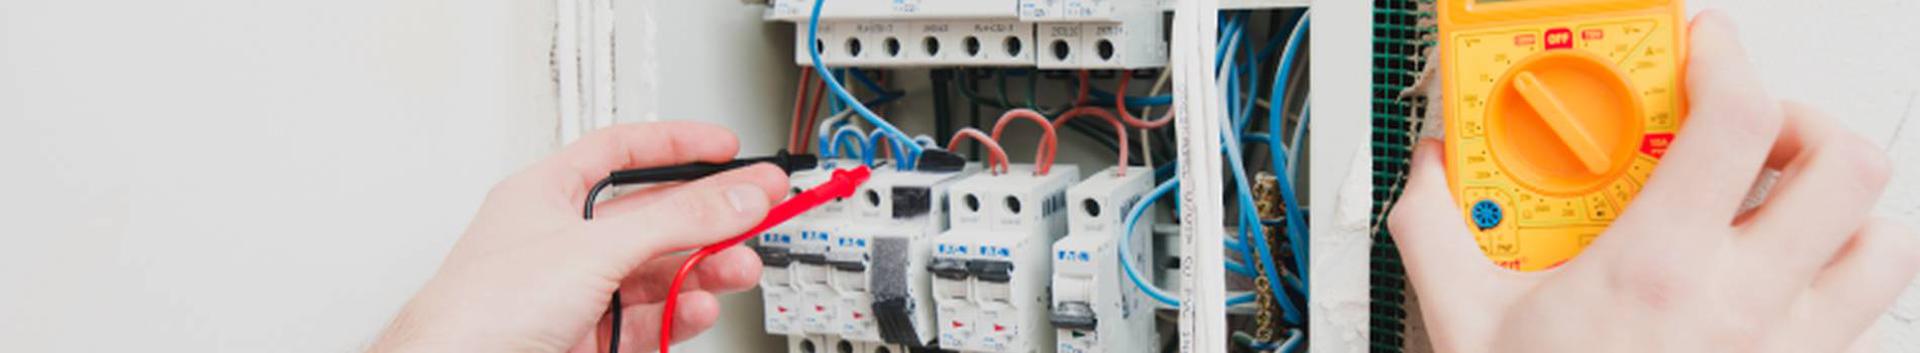 We perform a wide range of electrical services in Tallinn and Harju County, offering guaranteed quality and expertise.